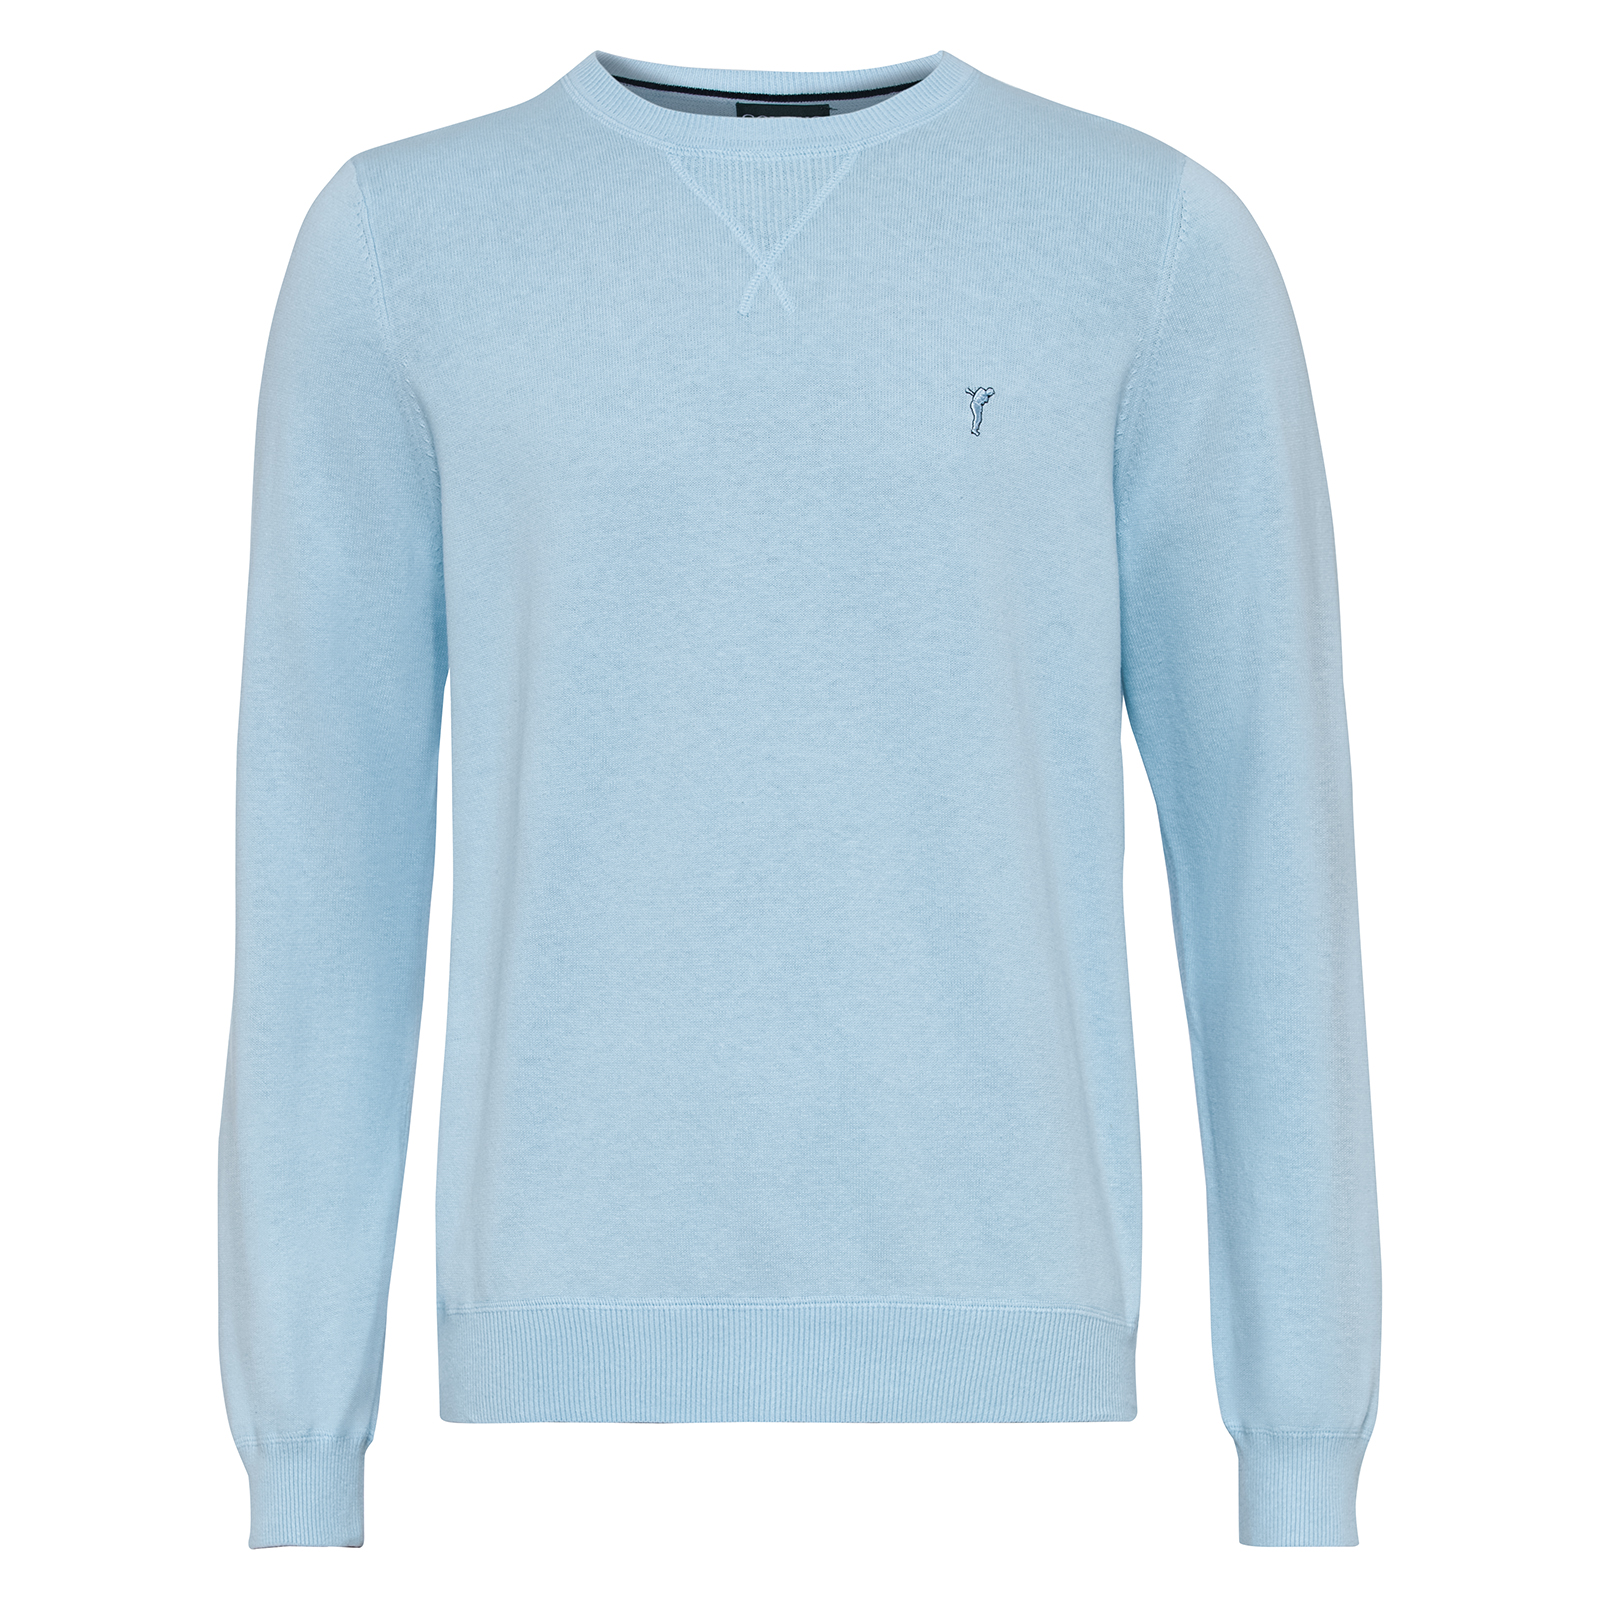 Men's knitted pullover made from soft cotton with a mottled look in regular fit